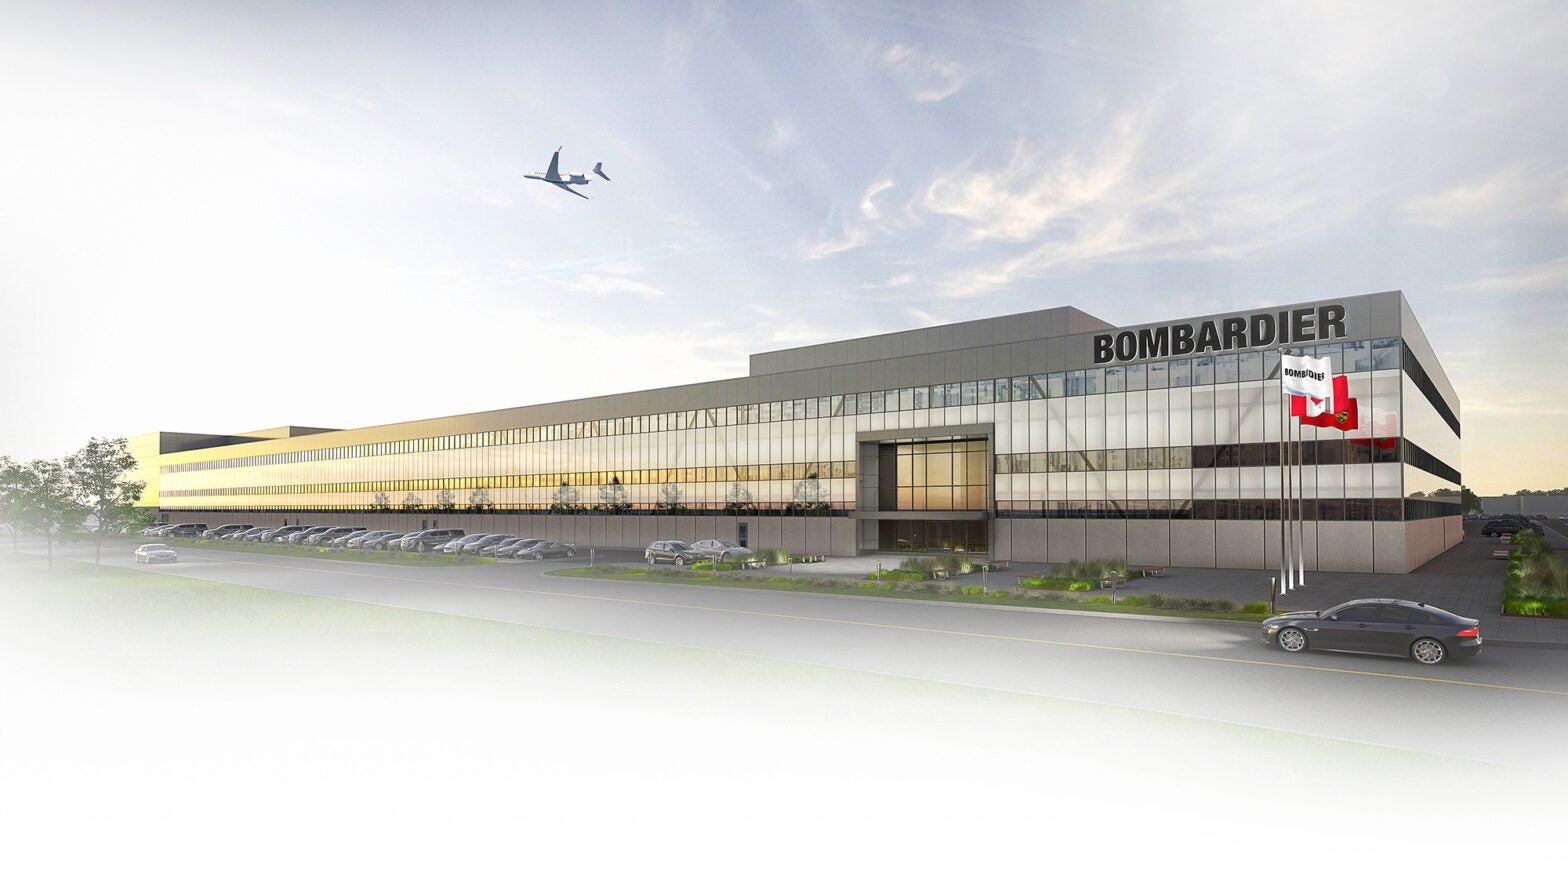 Bombardier to Build New Aircraft Assembly Center in Toronto